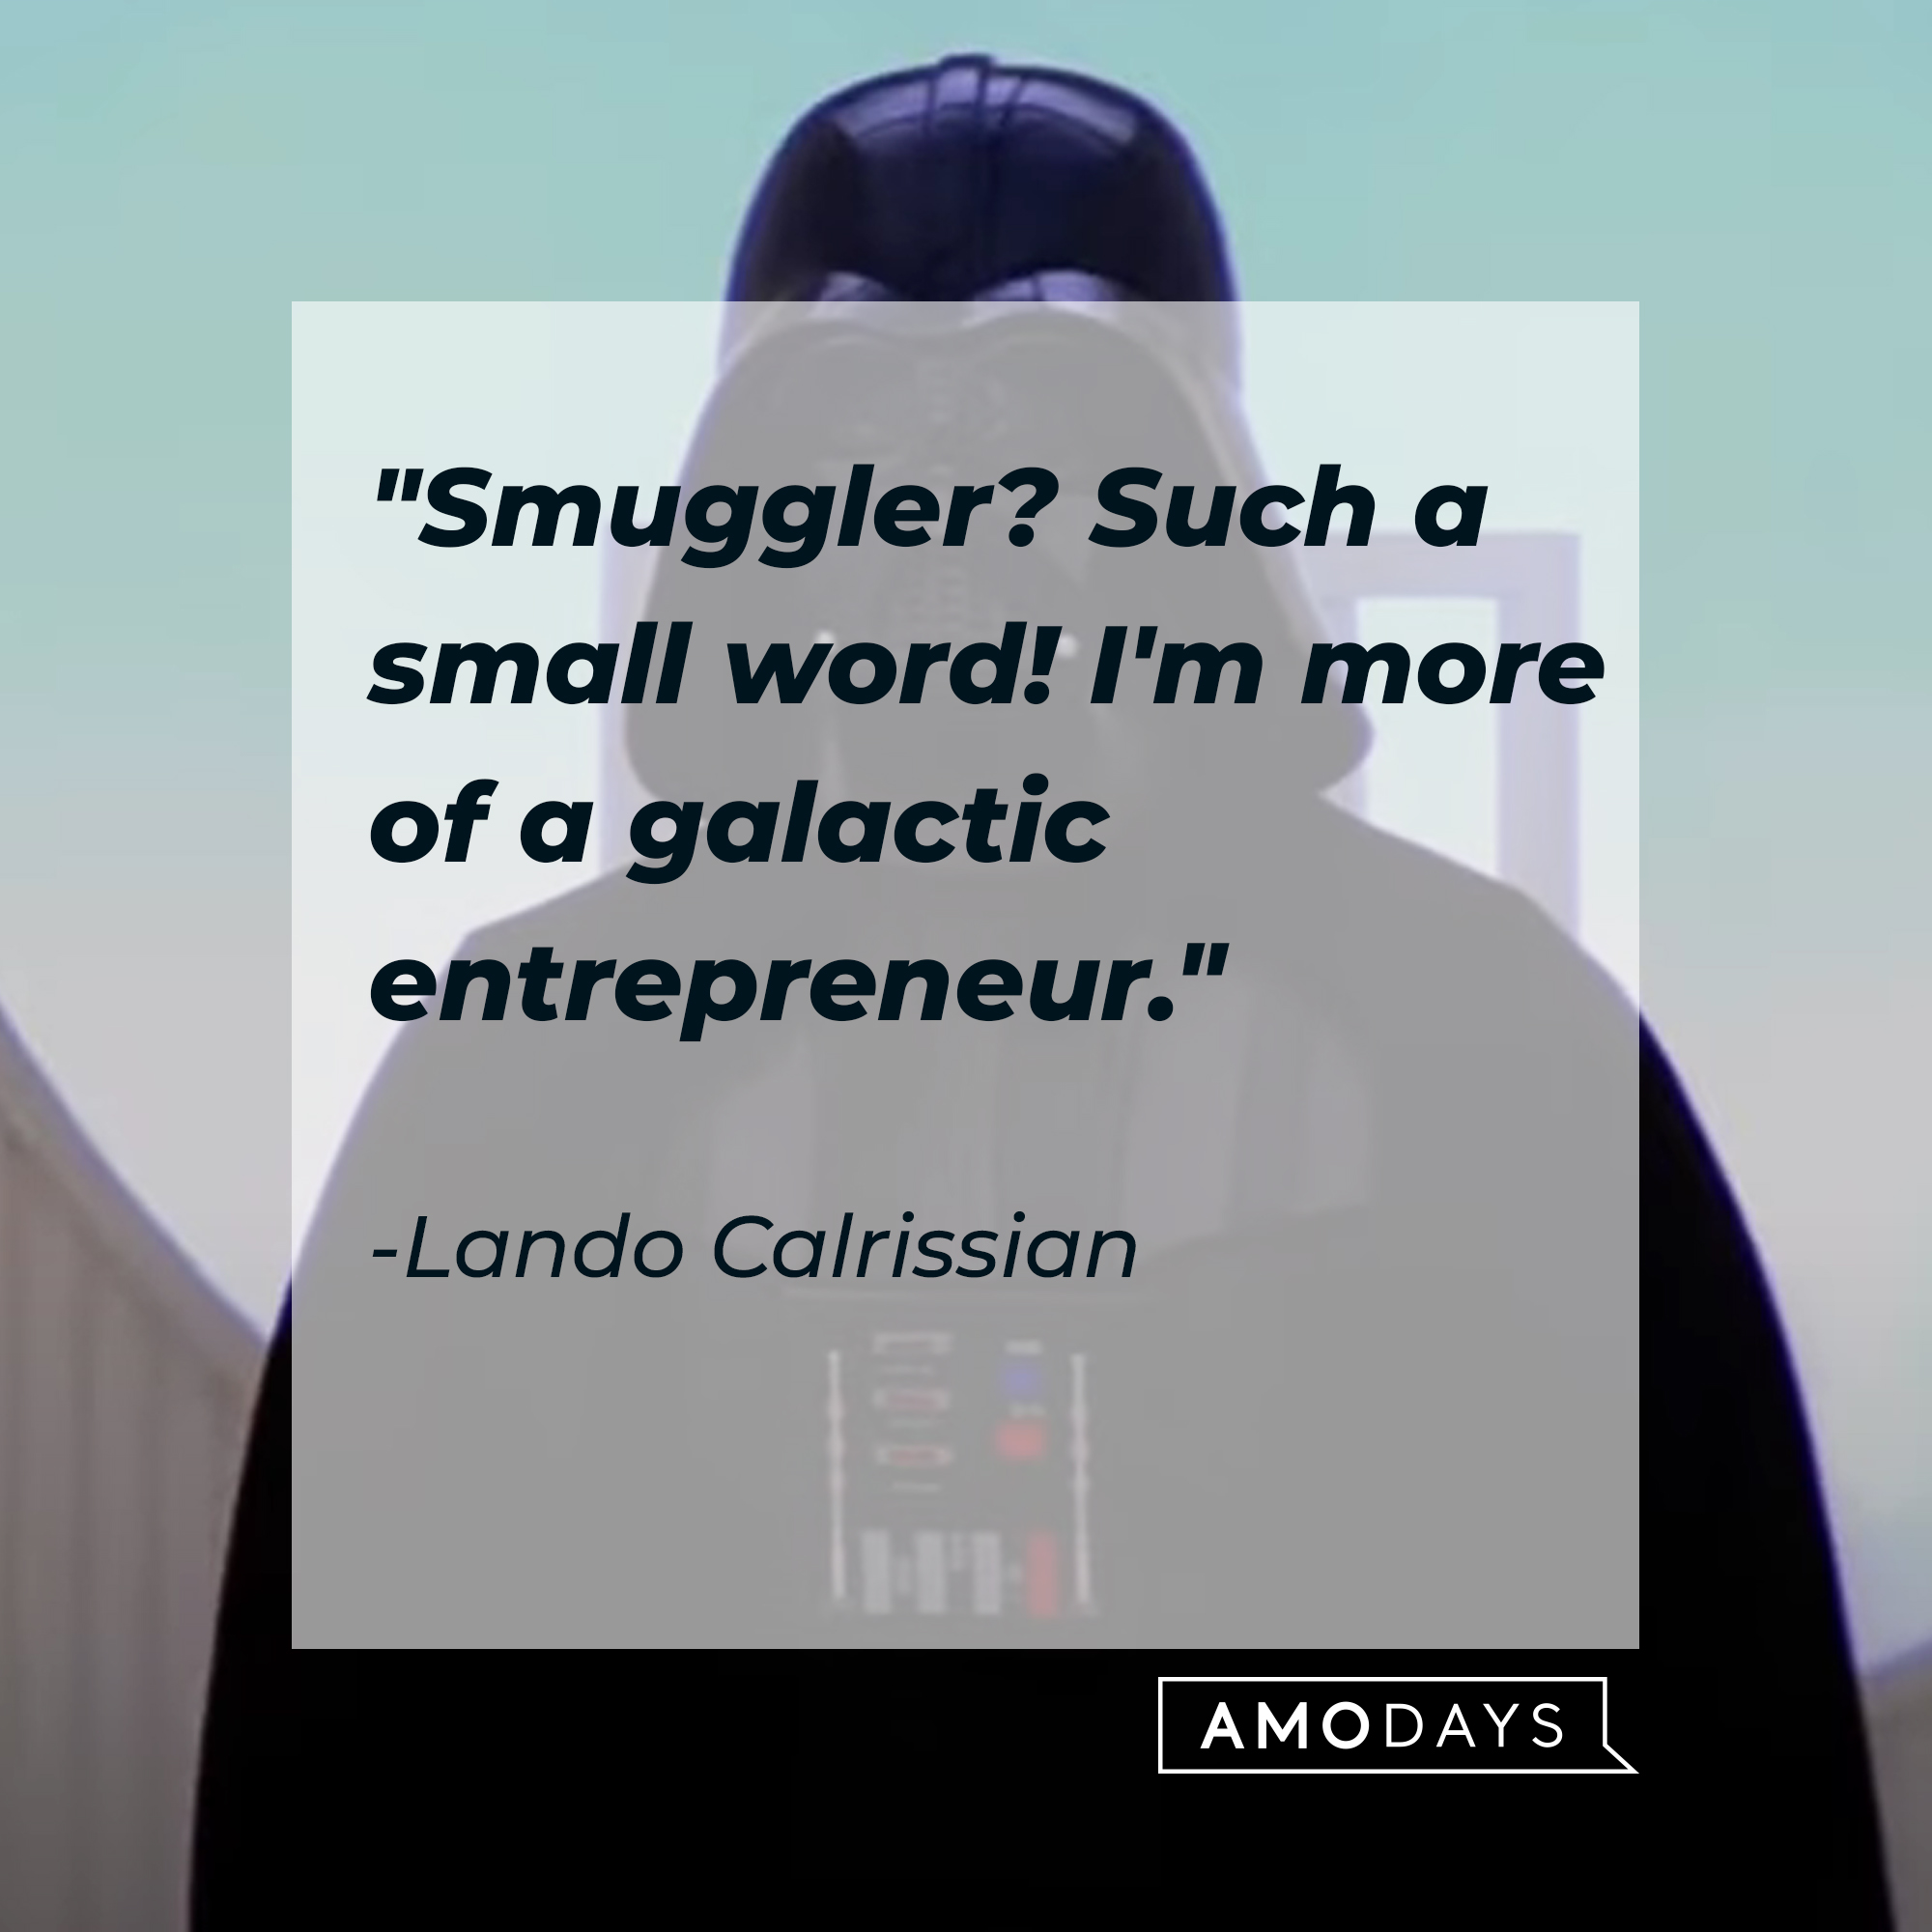 Lando Calrissian's quote, "Smuggler? Such a small word! I'm more of a galactic entrepreneur." | Source: Facebook/StarWars